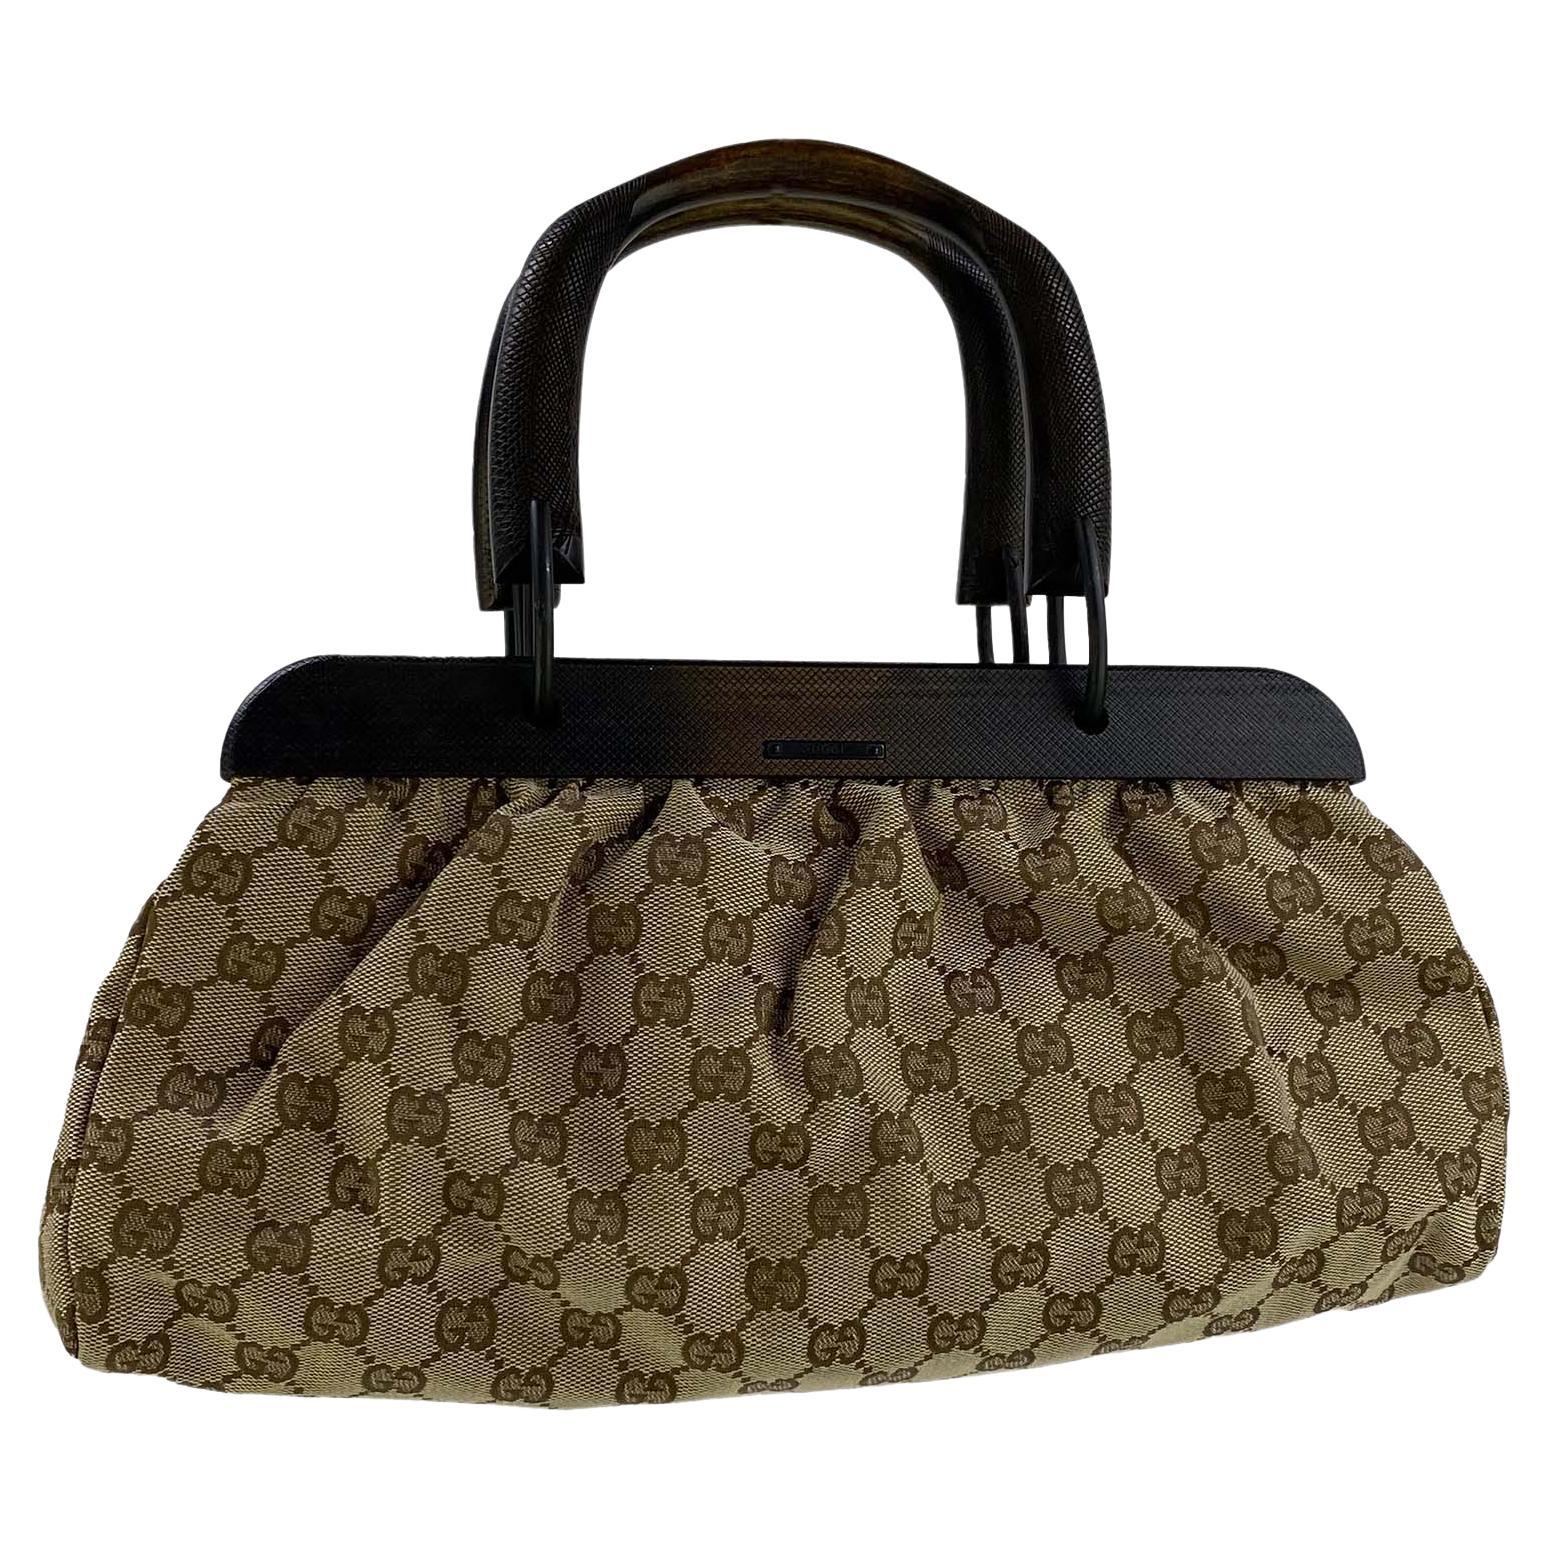 F/W 2002 Gucci by Tom Ford Wooden Handle 'GG' Bag